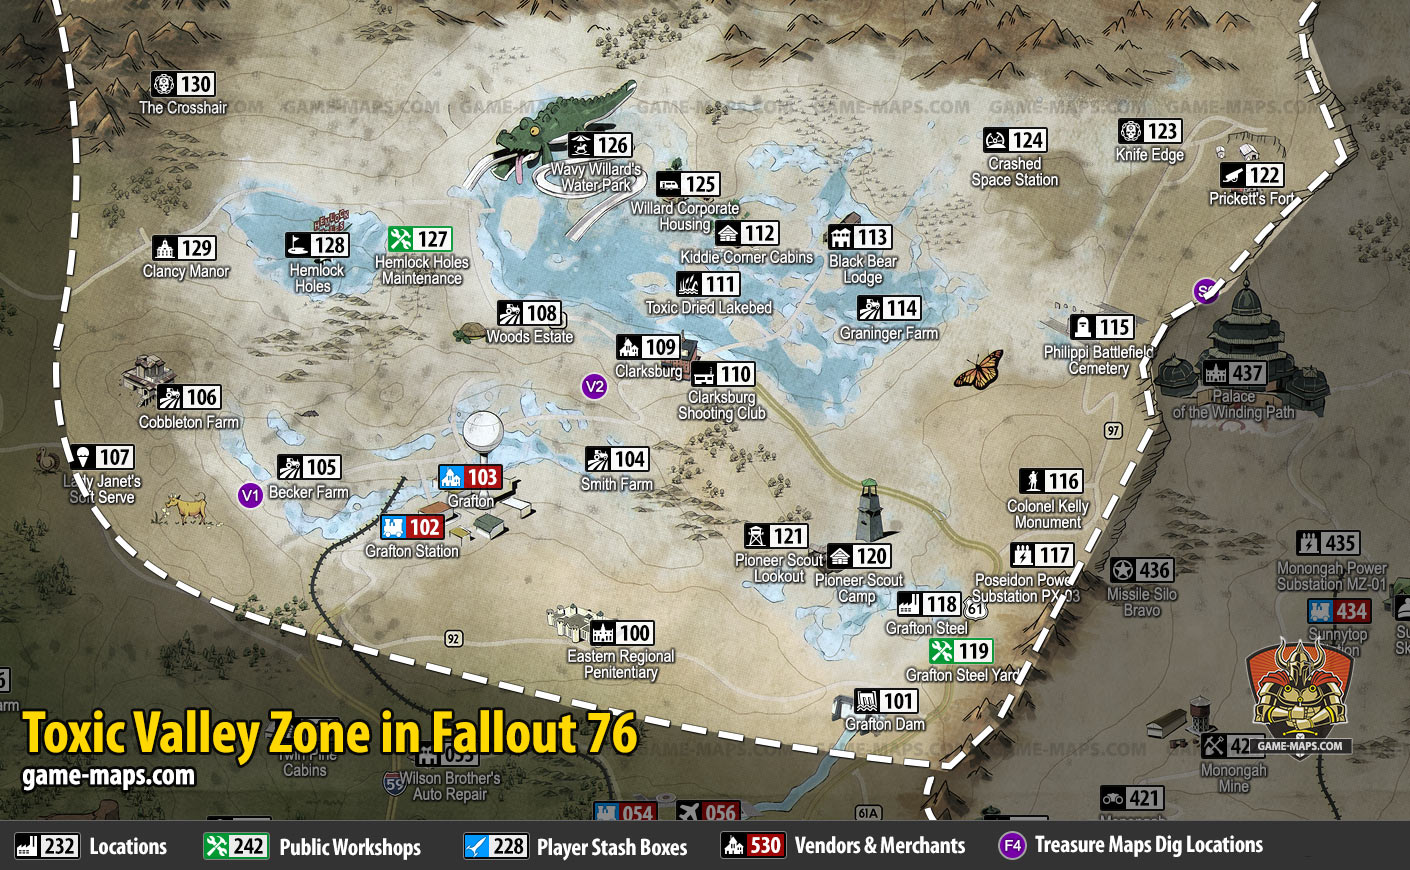 Map of Toxic Valley Region for Fallout 76 Video Game. 